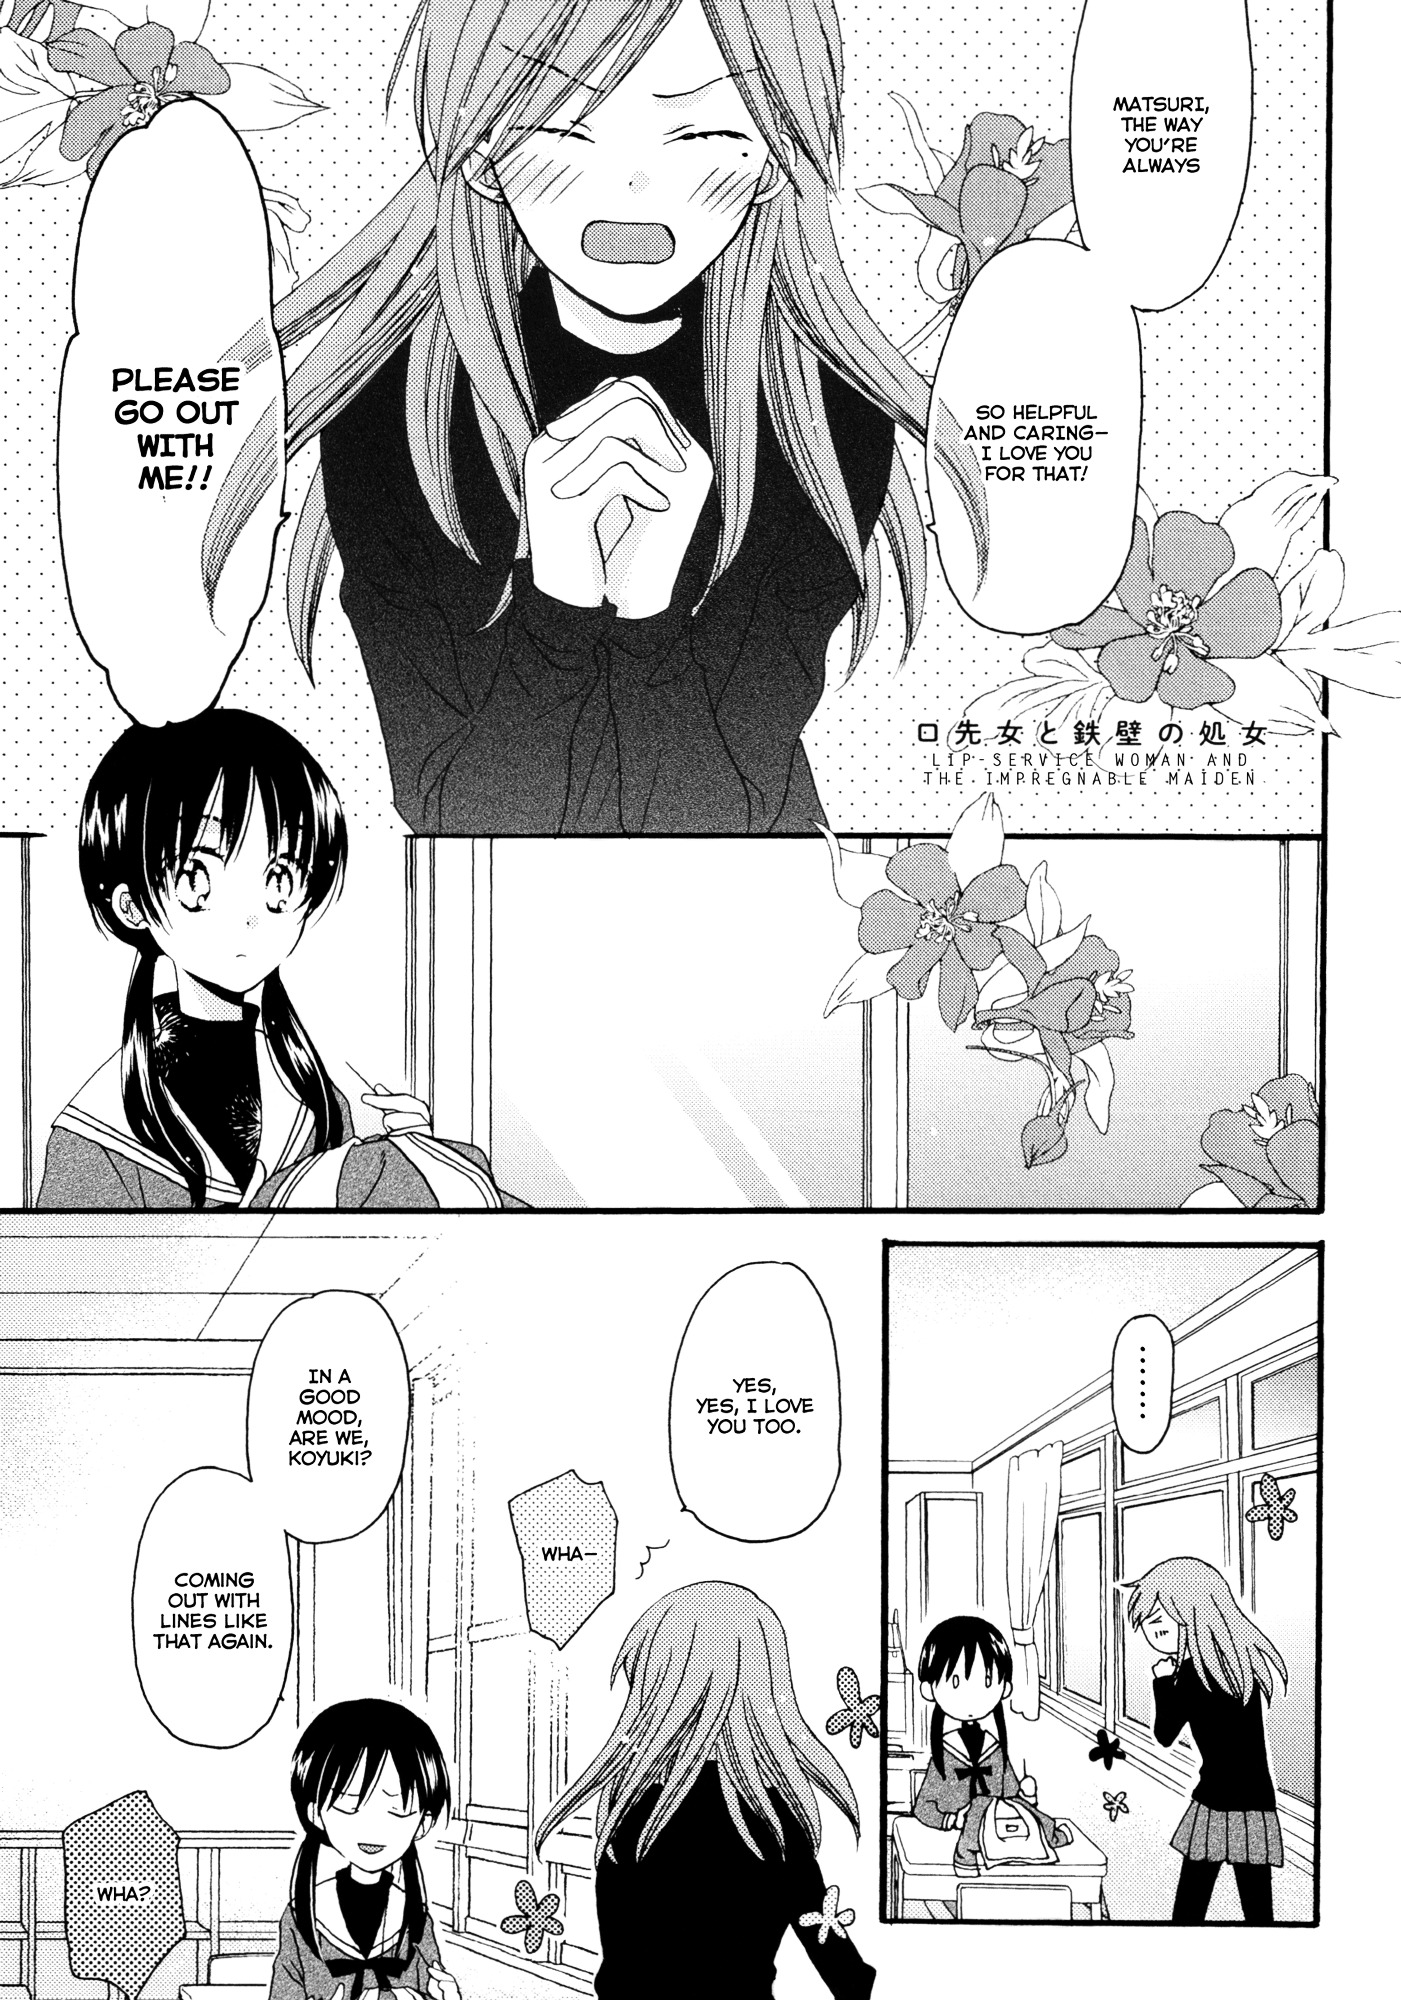 Laika, Pavlov, Pochihachikou Chapter 3 : Lip-Service Woman And The Impregnable Maiden - Picture 1